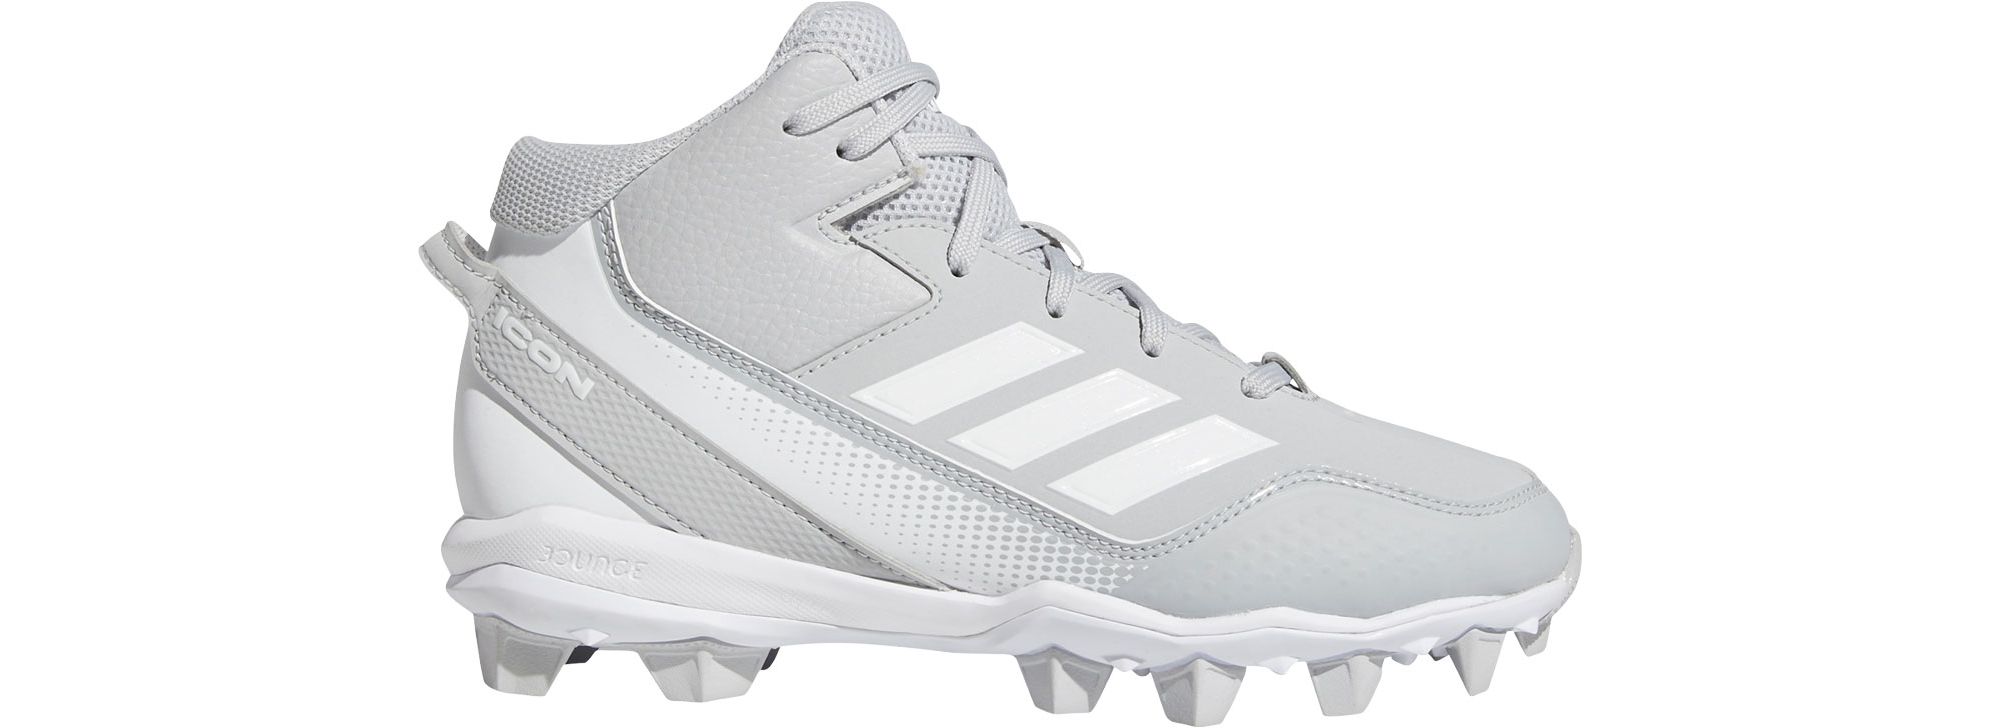 Under Armour Harper 7 Mid RM Mens Baseball Cleats - Gray / White 11